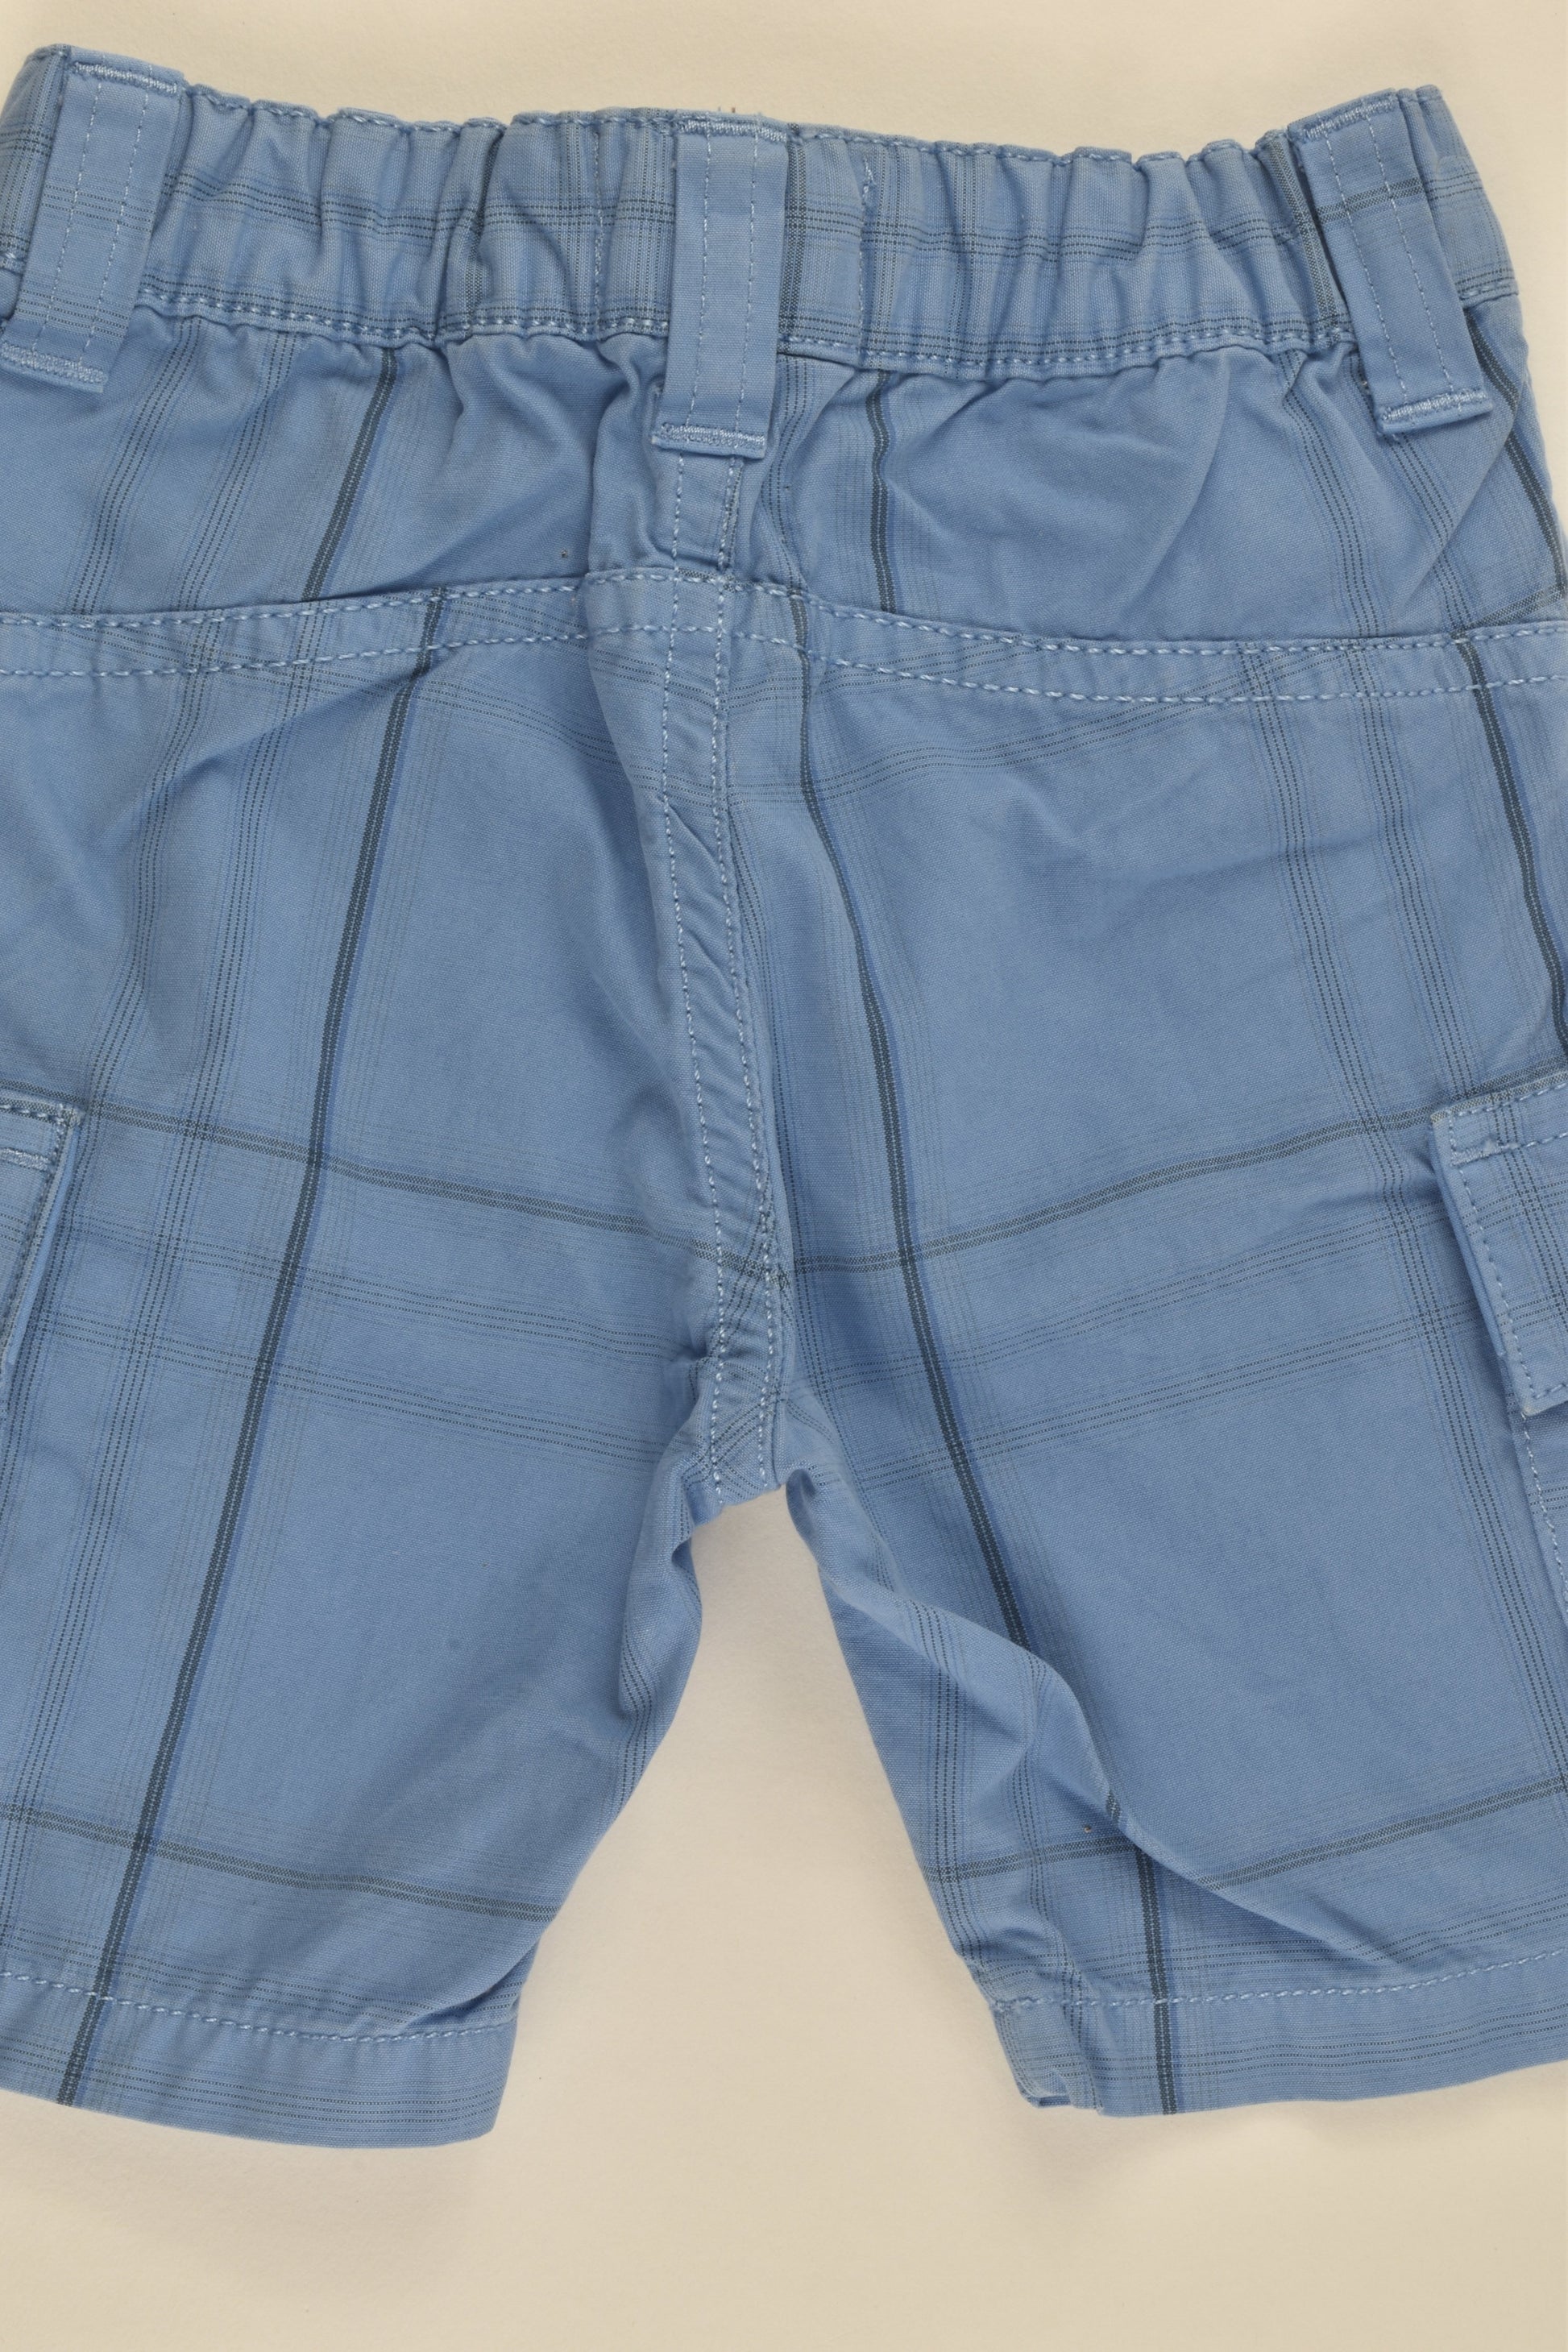 Timberland Size 00 (6 months, 68 cm) Shorts